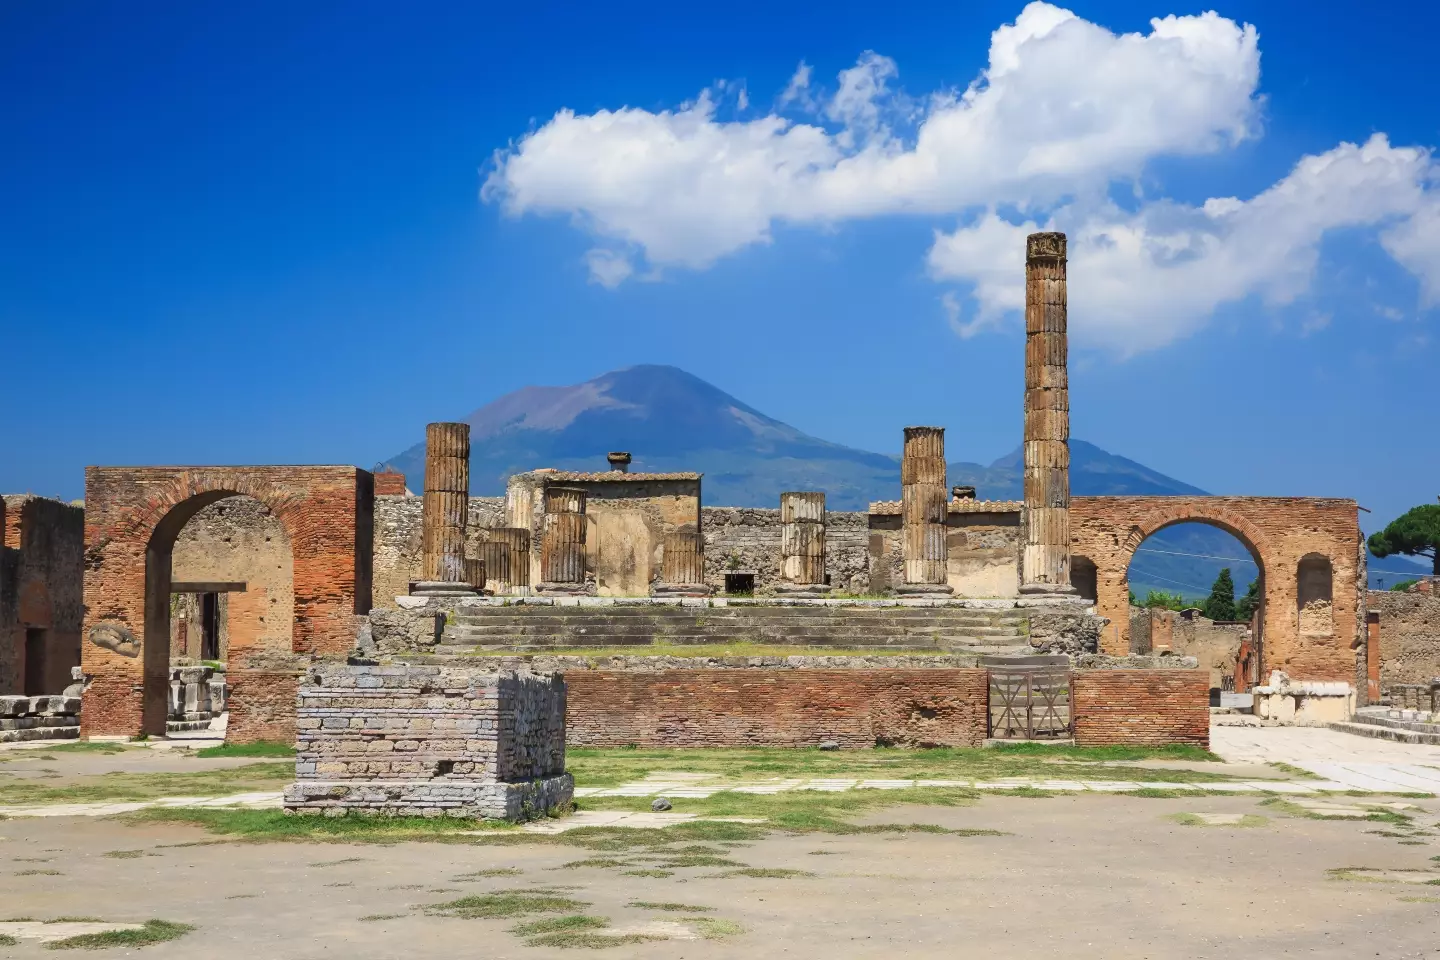 Pompeii is a popular site for tourists in Italy.